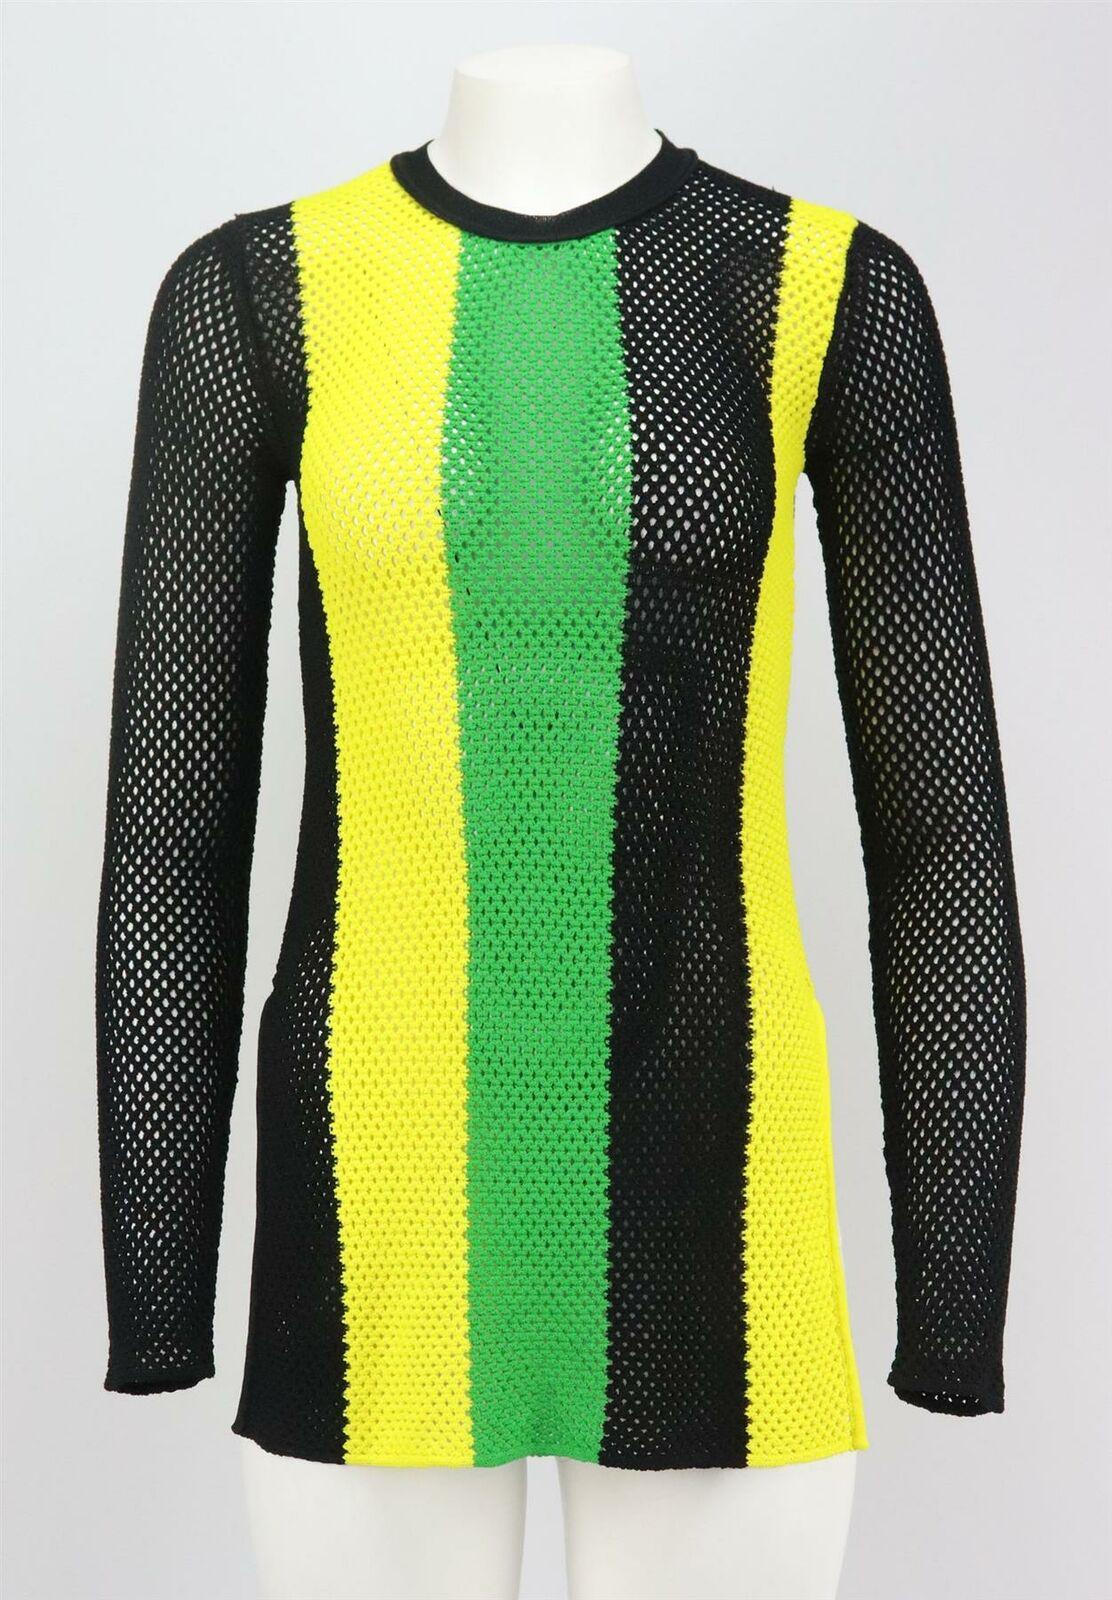 Proenza Schouler's long sleeve top is striped in an array of hues, so it will be easy to style with a number of pieces you already own, it's made from a flexible knitted mesh and has a slim silhouette that flatteringly hugs your curves.
Black,